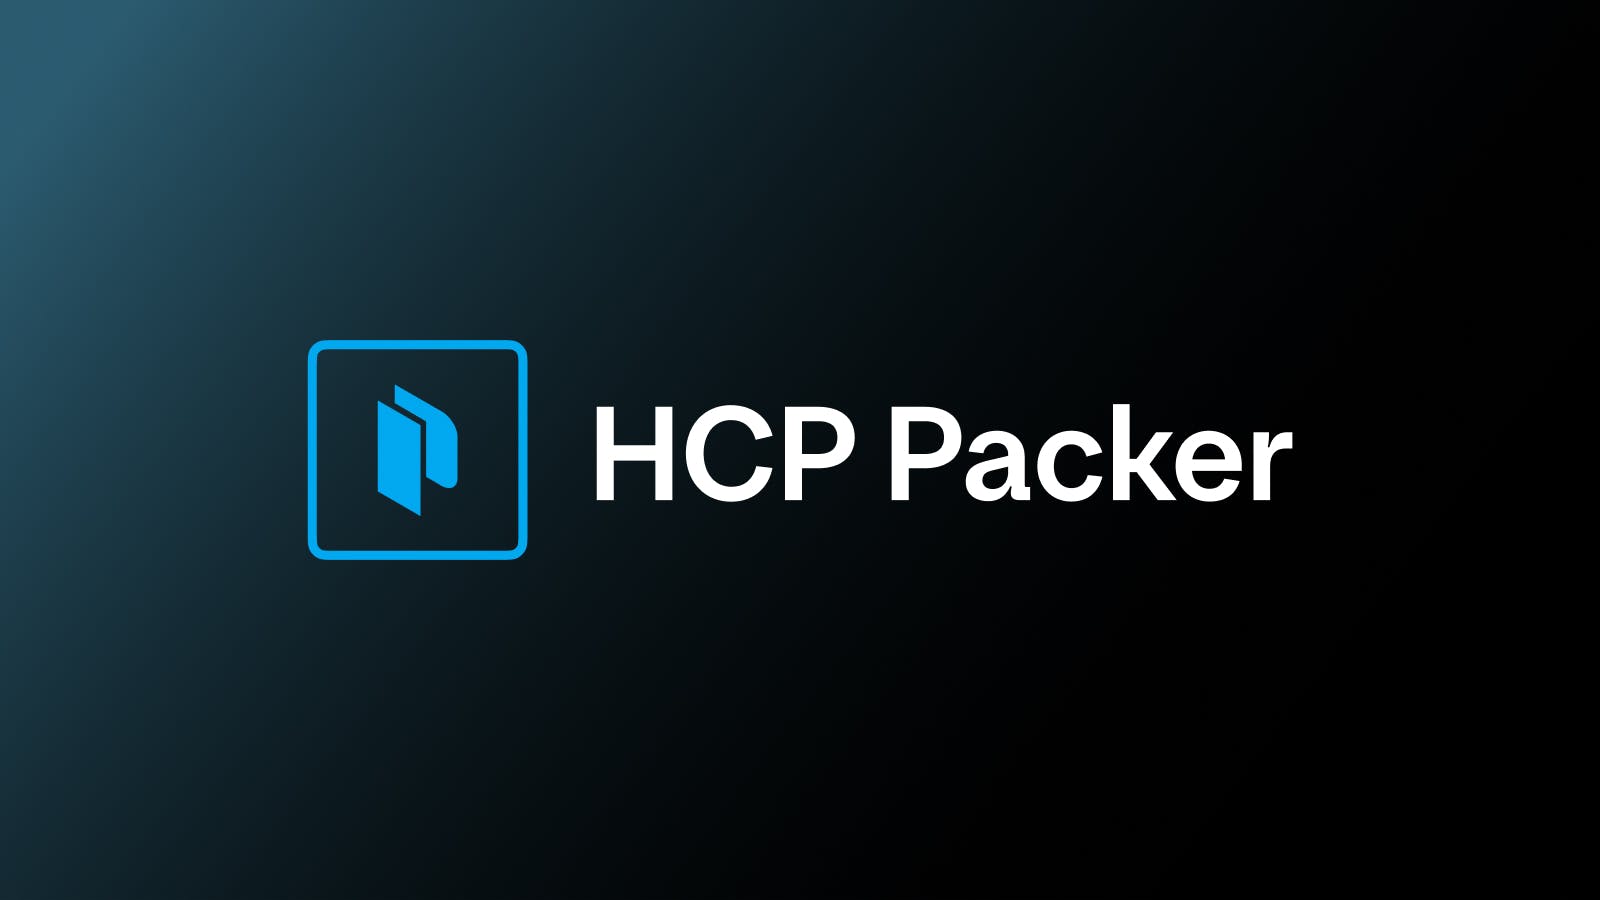 HCP Packer now supports webhooks and streamlined run task reviews